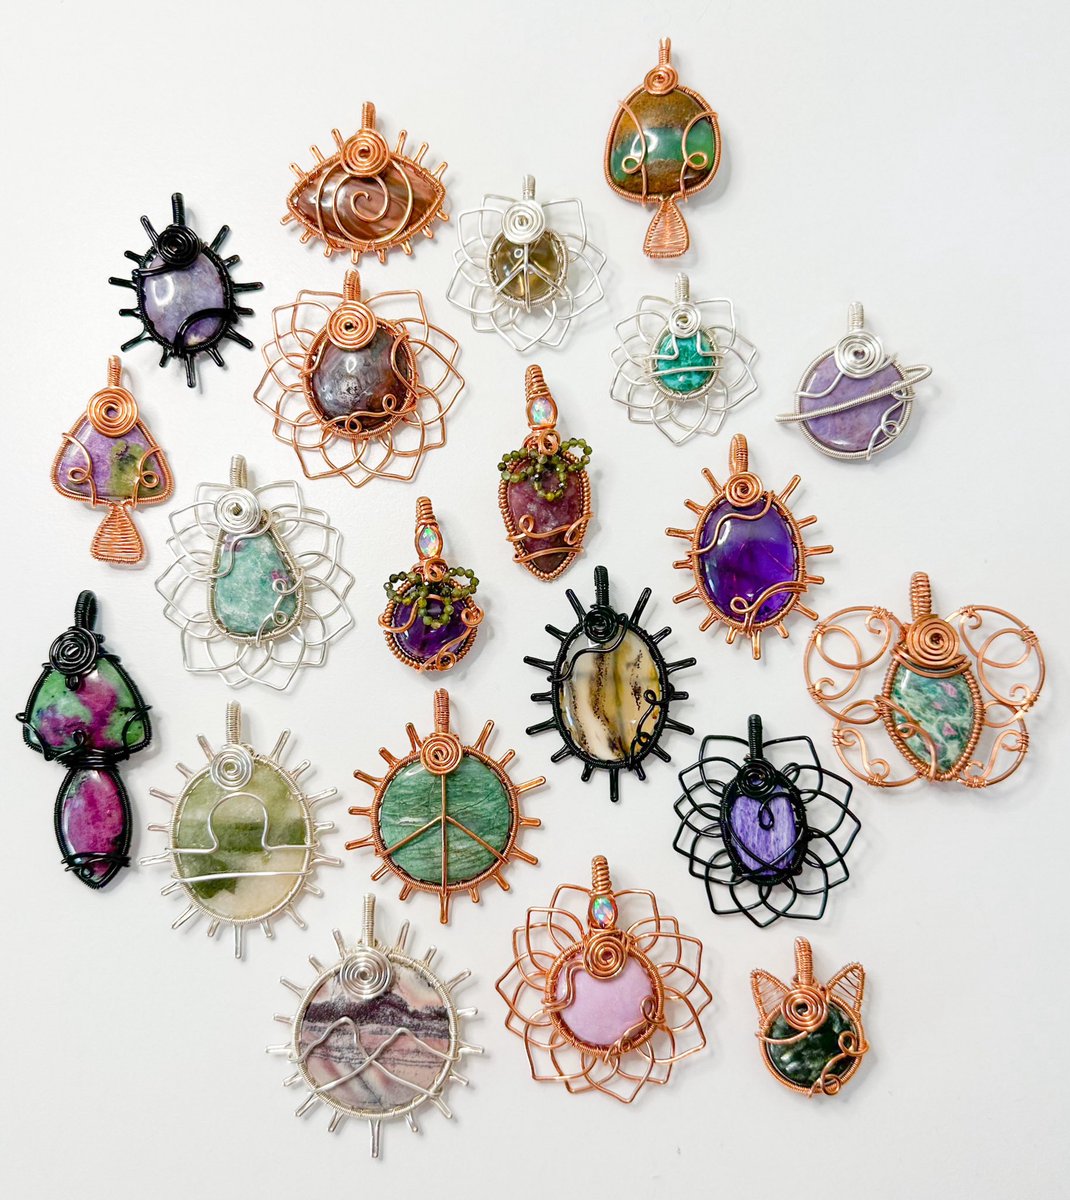 the crystals 🪻🌲🧞 the pendants “wisteria woods” collection coming Friday April 26th at 8pm eastern time <3